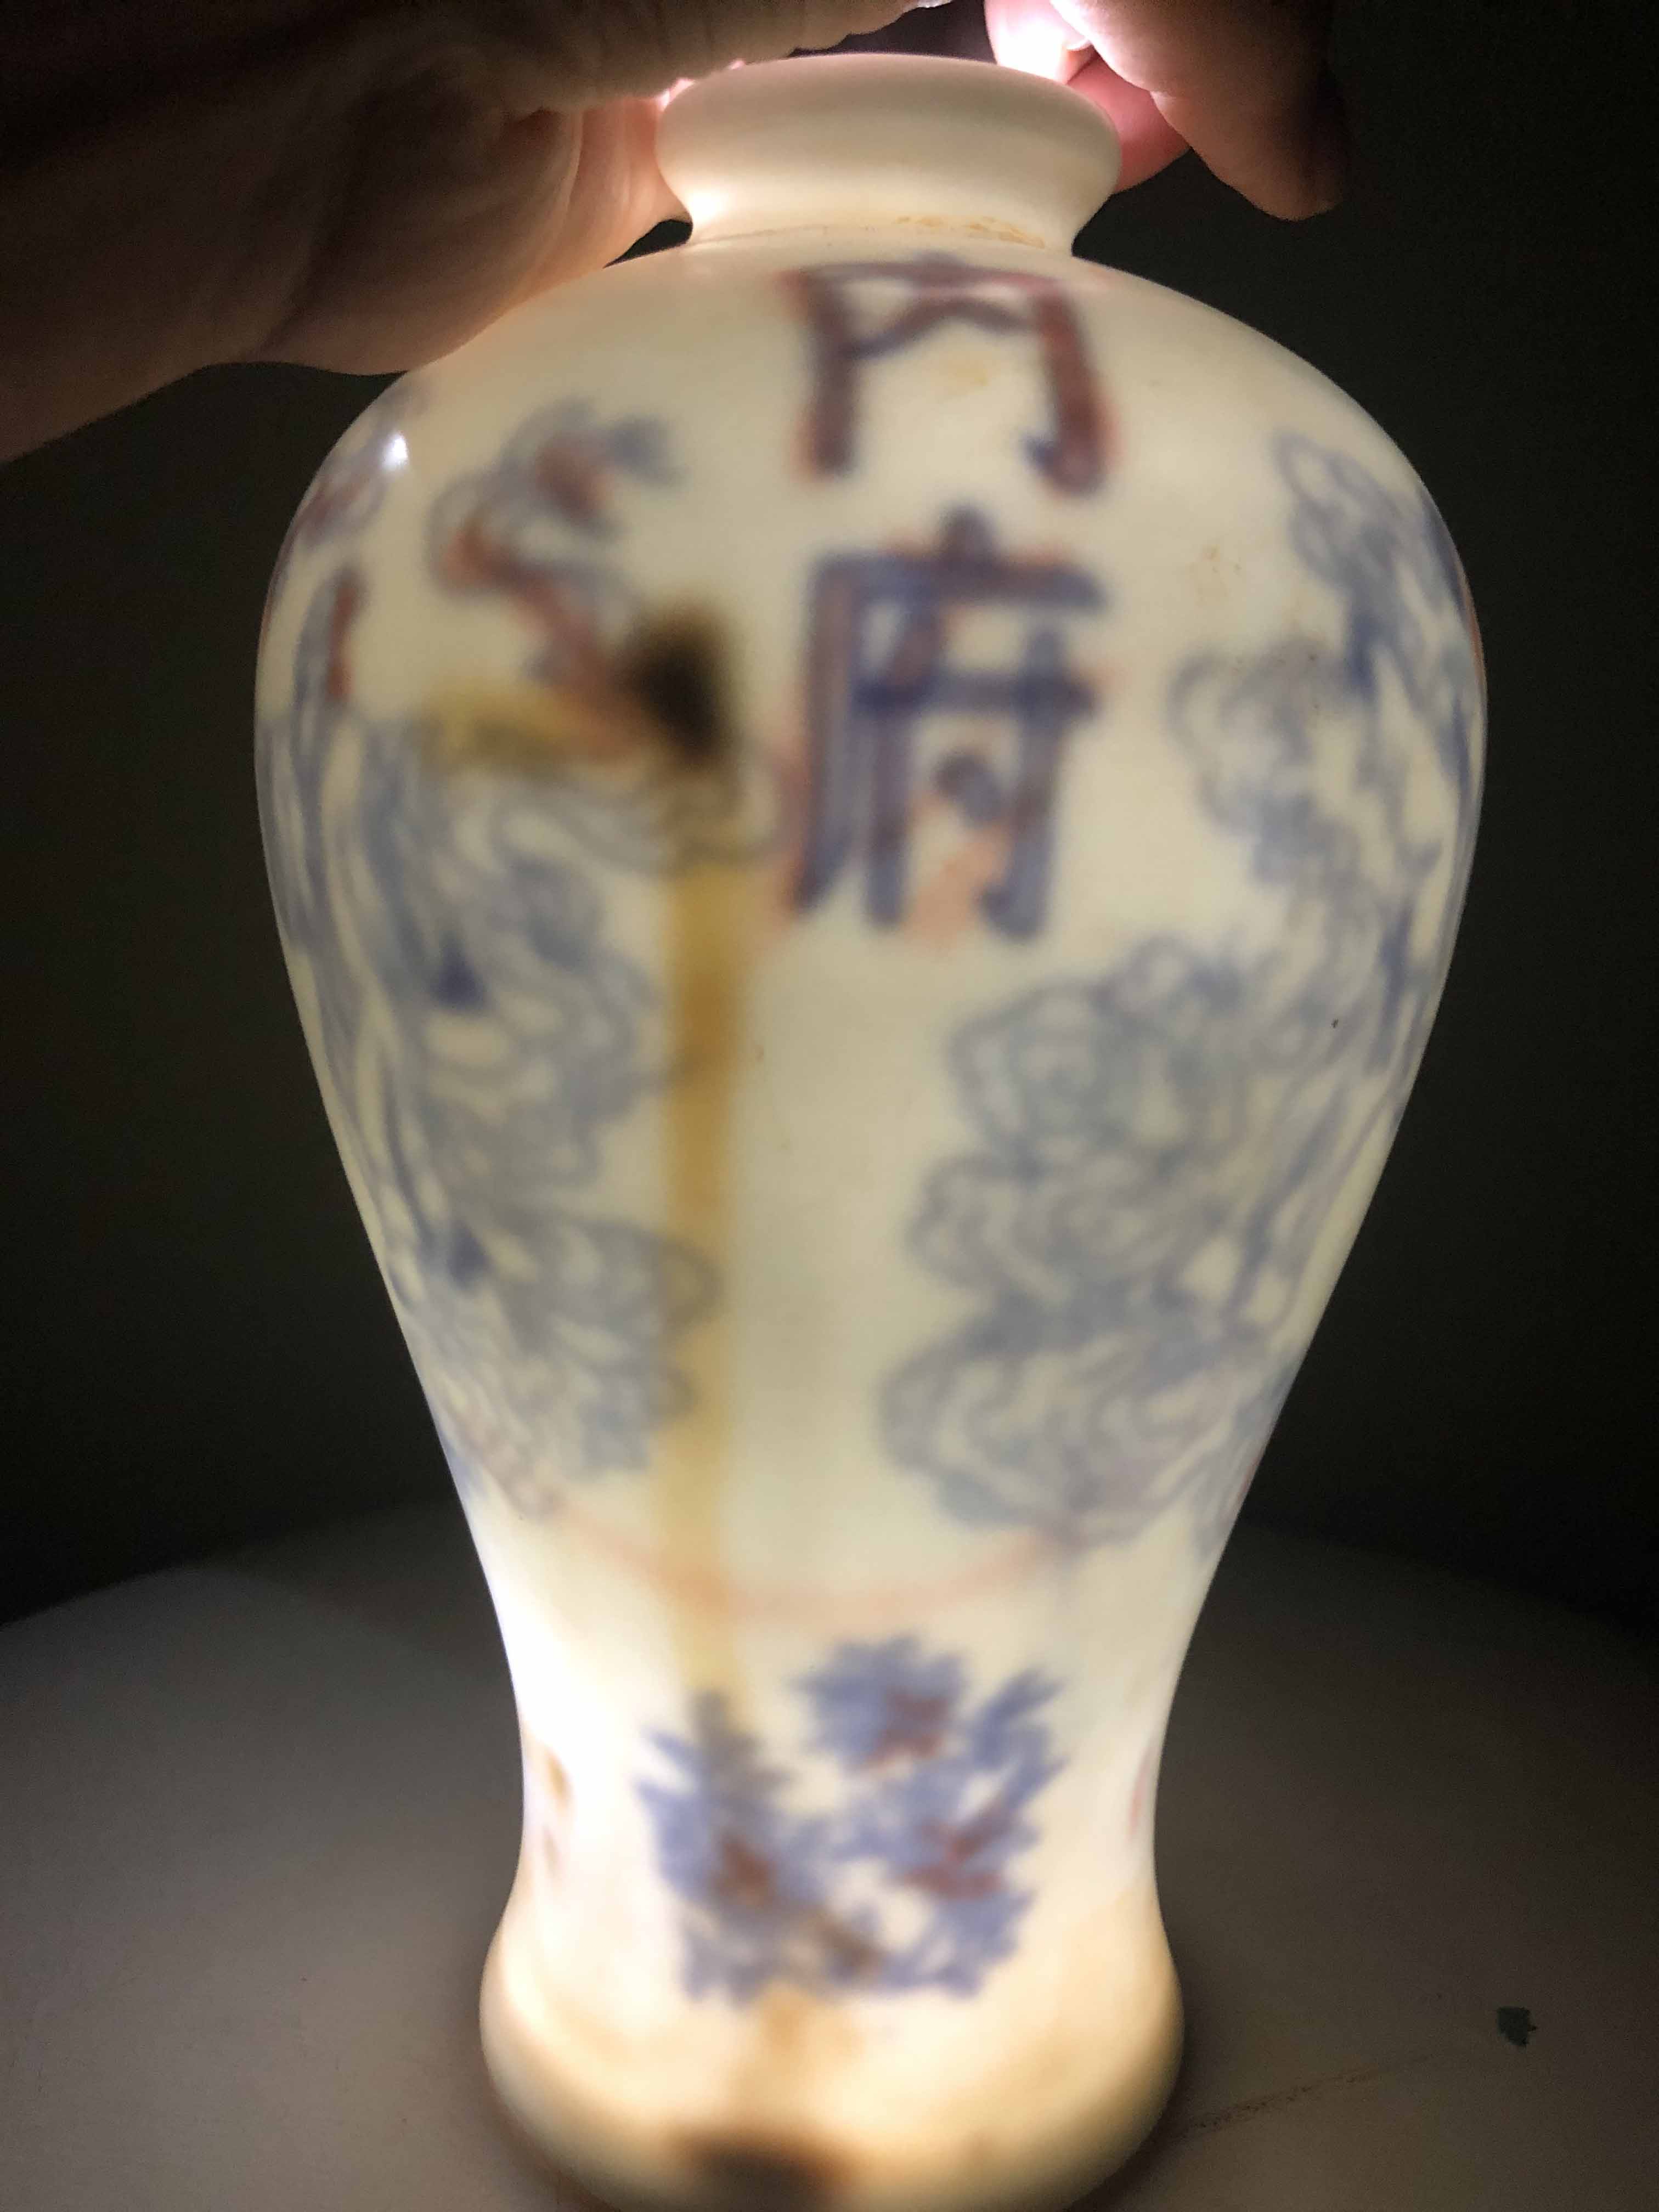 Chinese Vase with hidden markings - only visible with torchlight